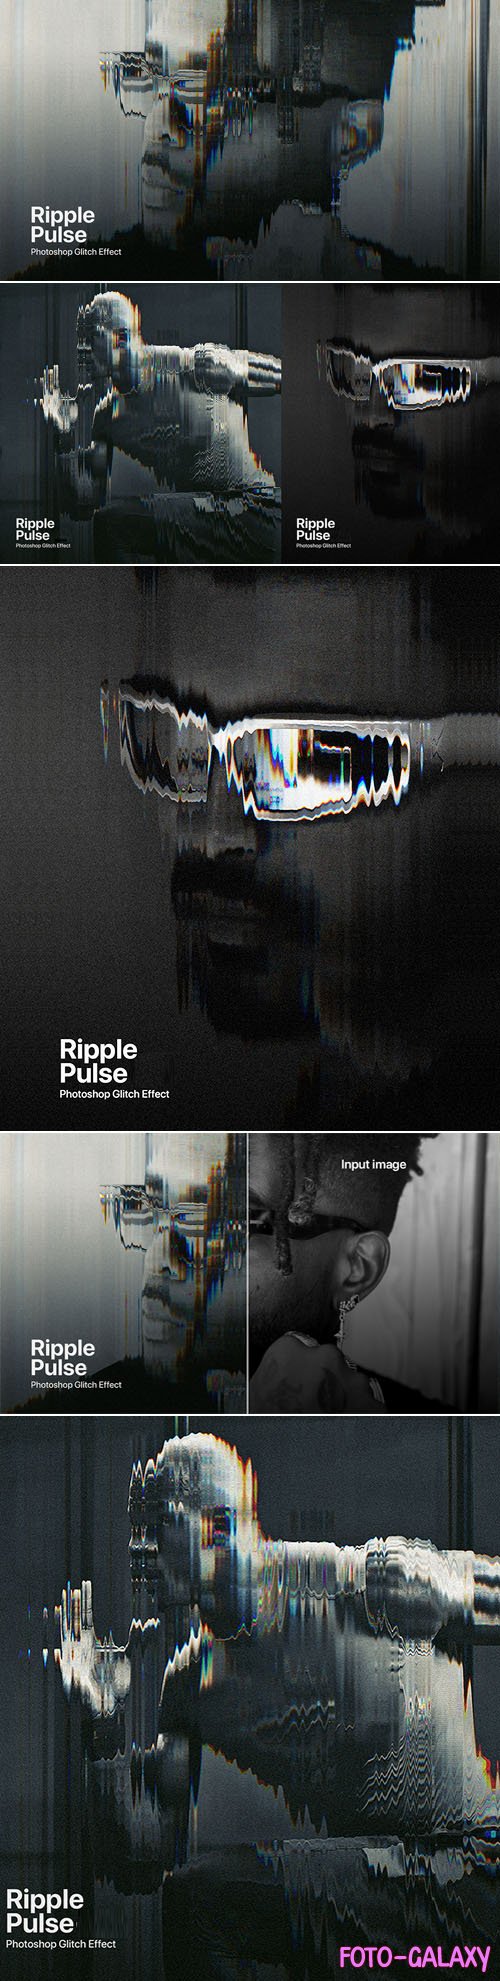 Ripple Pulse - Glitch Effect for Photoshop